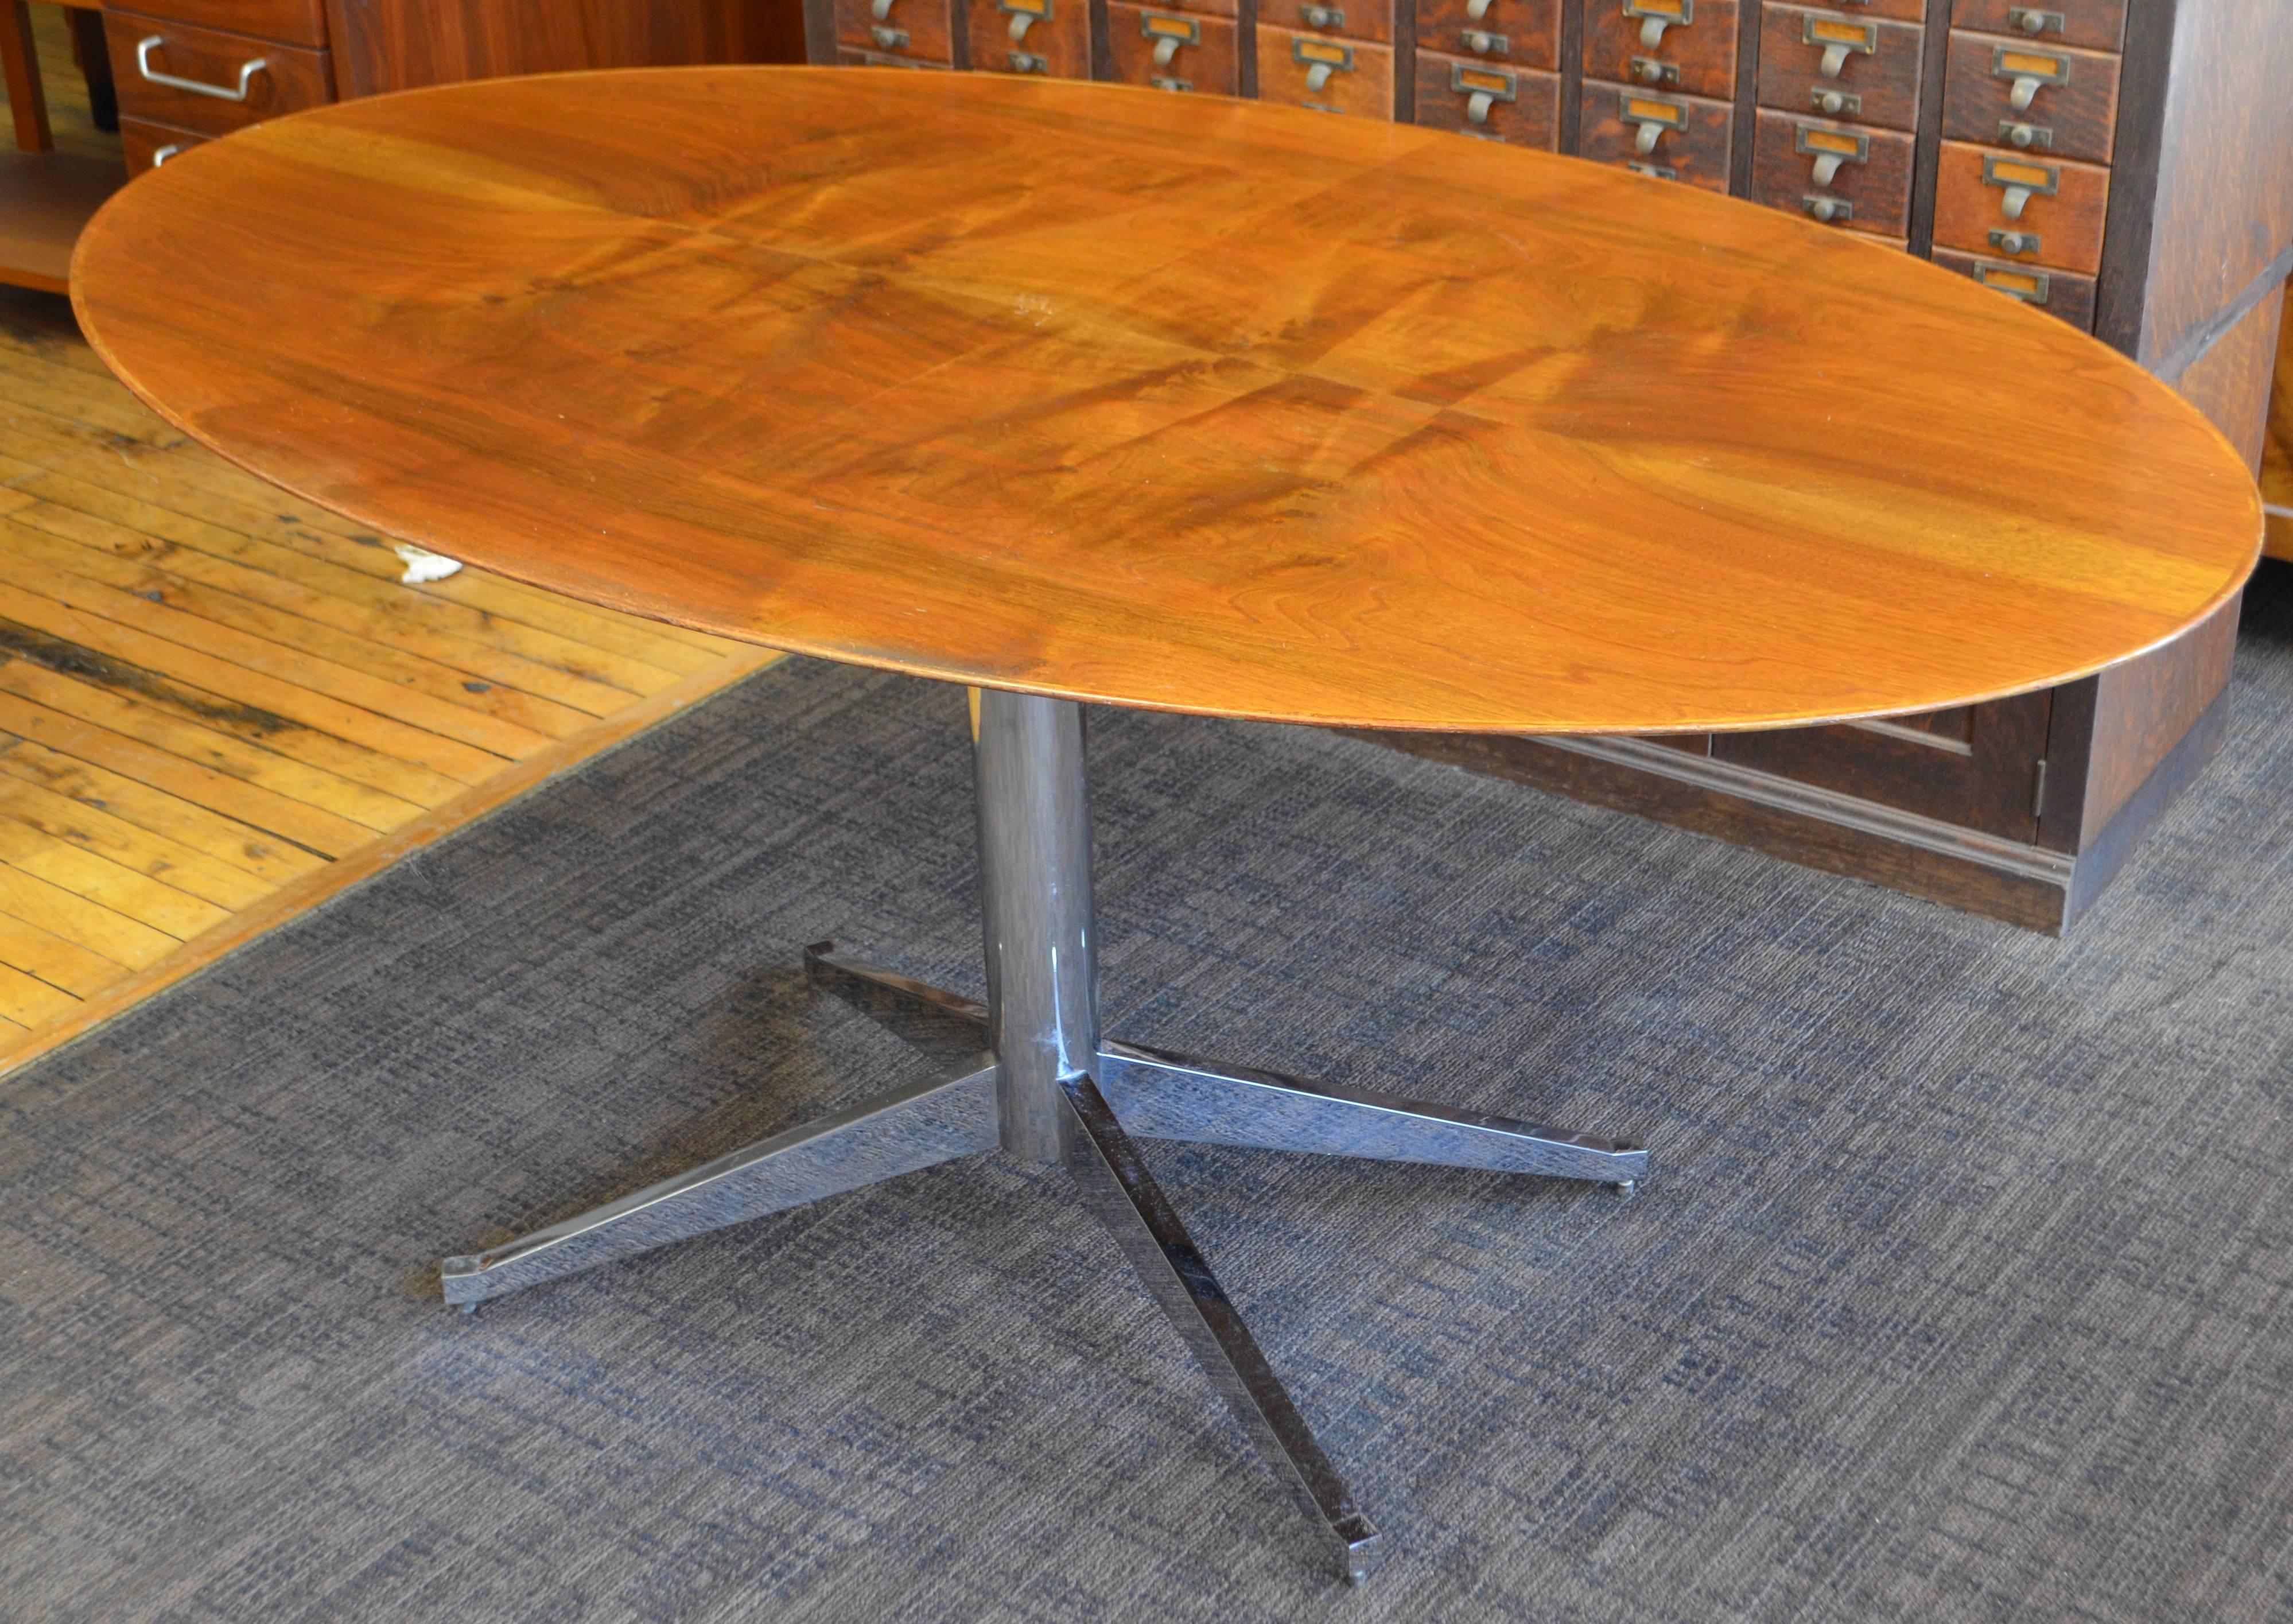 Florence Knoll mid-century dining, conference table or desk with chrome base. Oval shape gives the table a handsome, sophisticated look. Extremely well-appointed. The simplicity and aesthetic of a Florence Knoll design brings a certain calm and